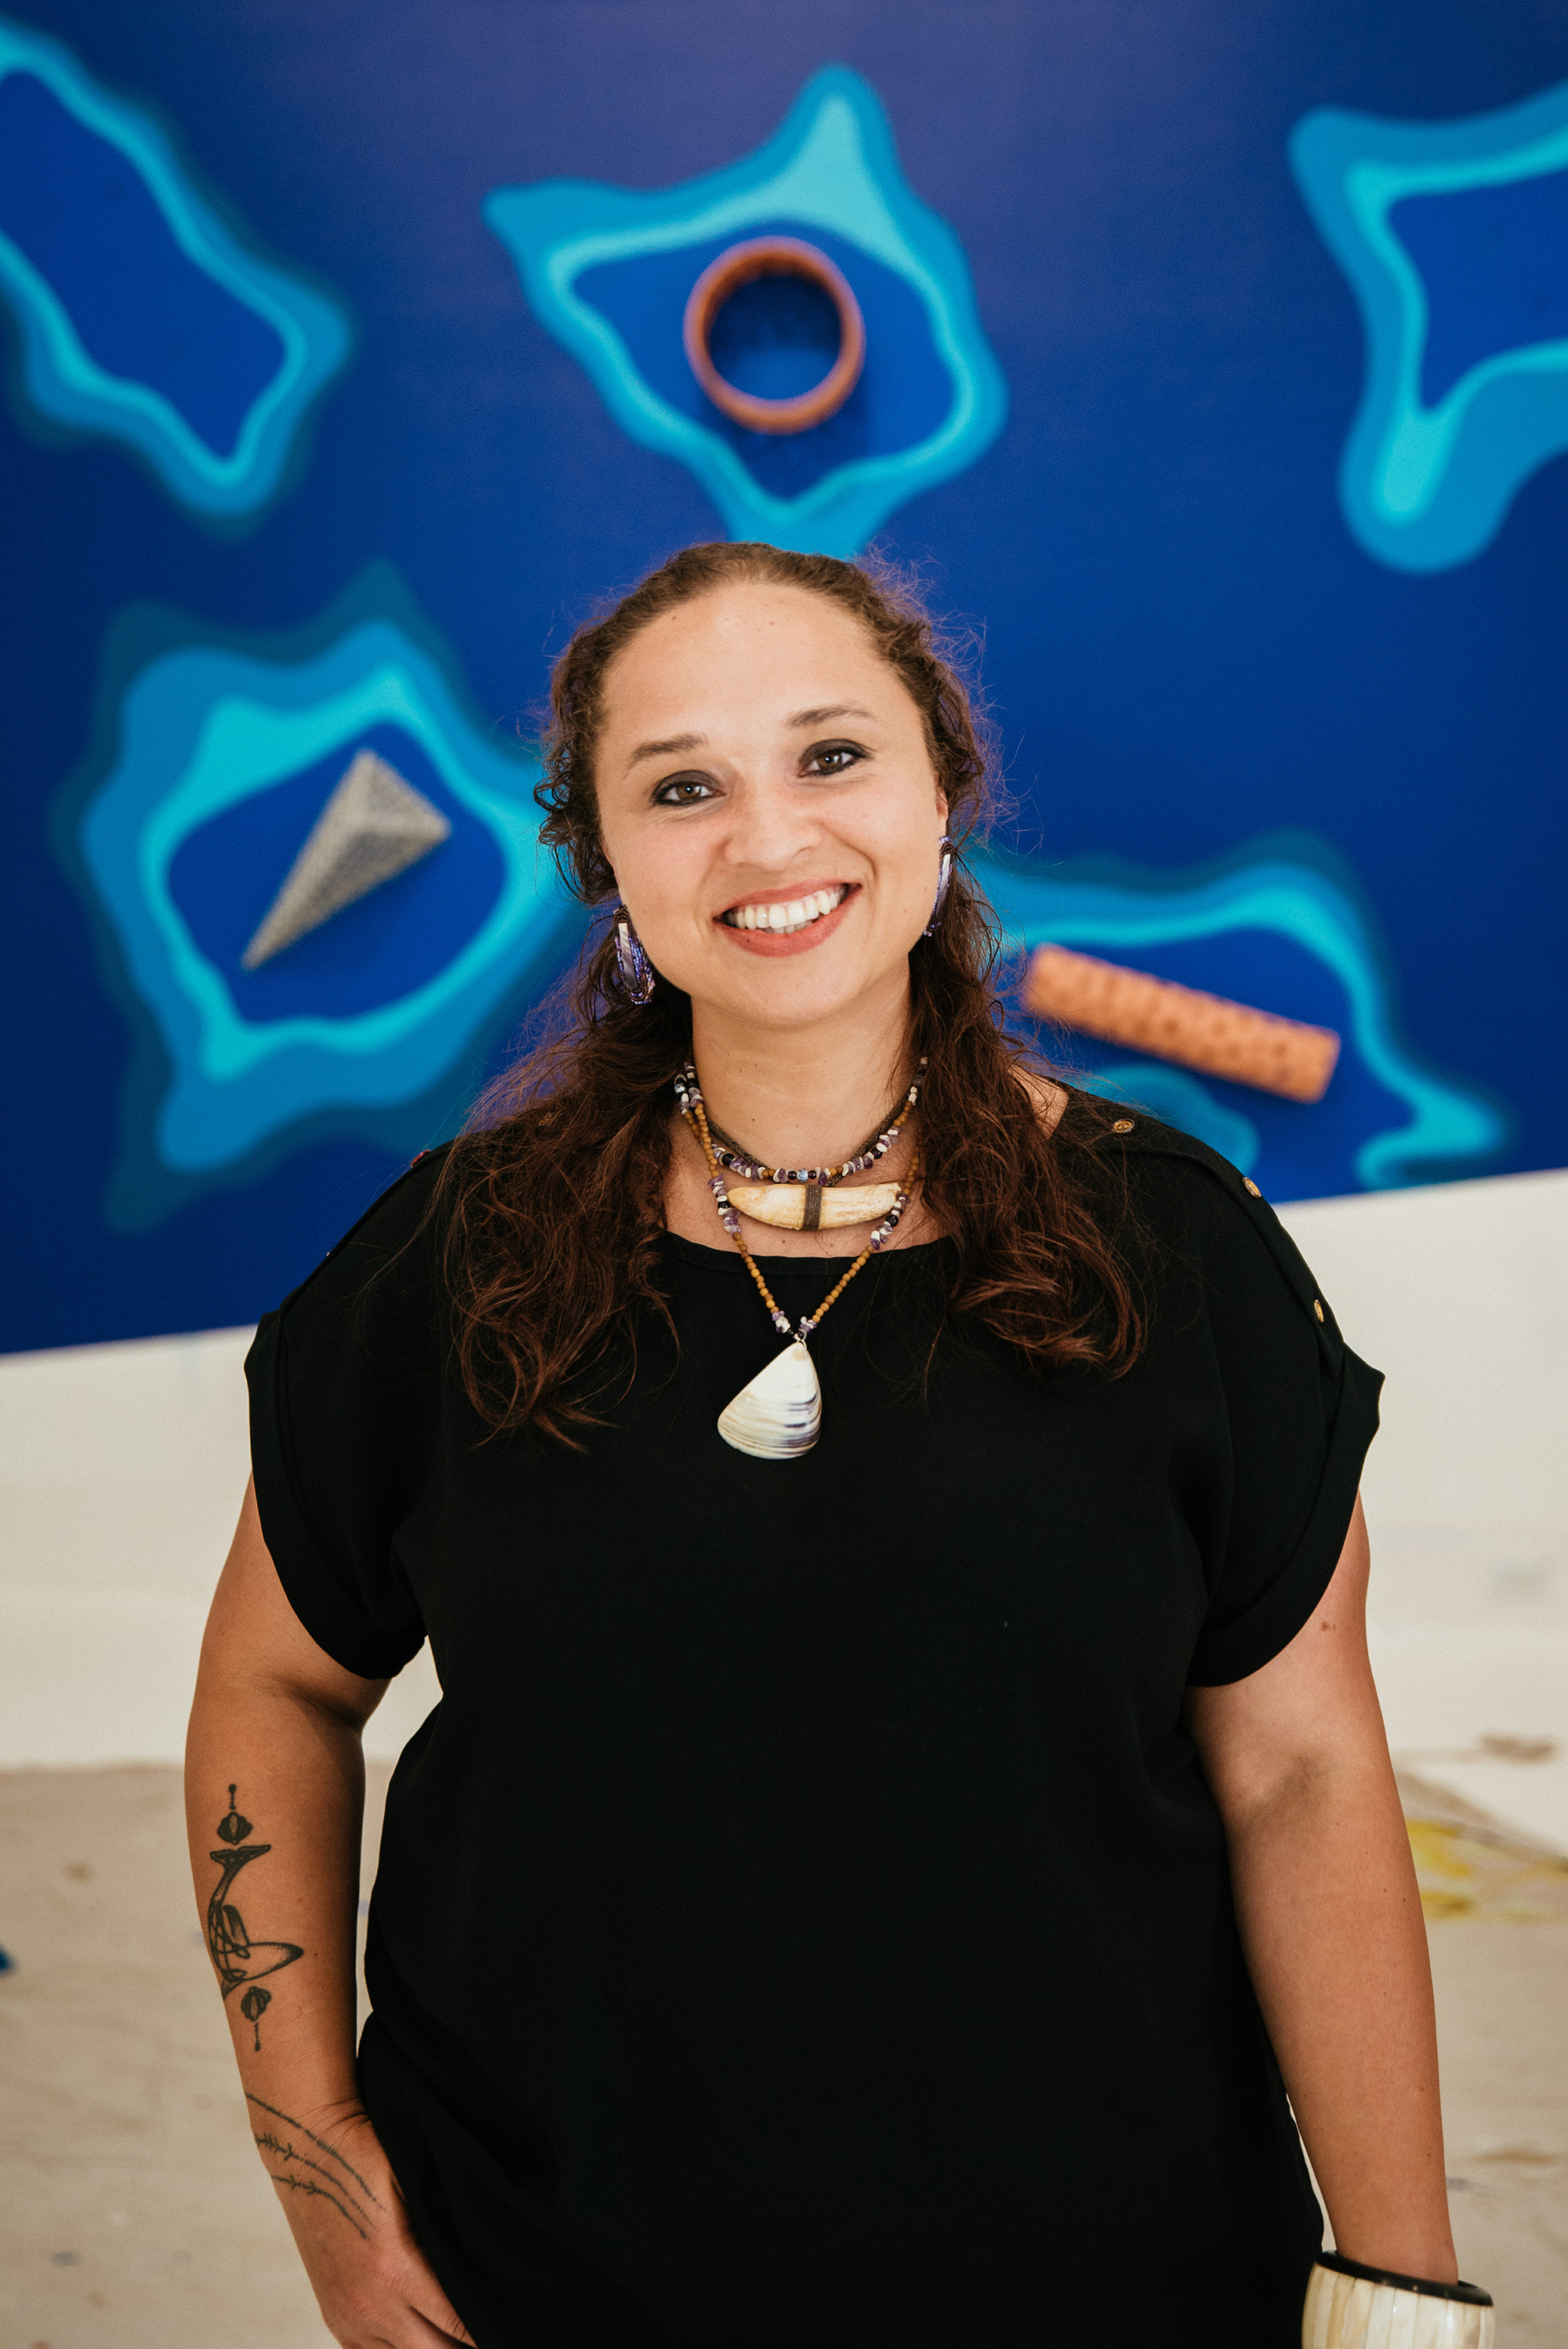 Indigenous woman standing in front of a blue background with objects attached to the wall. Woman is wearing a black shirt and has two necklaces on made of bone/shells. her hair is half up and she is smiling